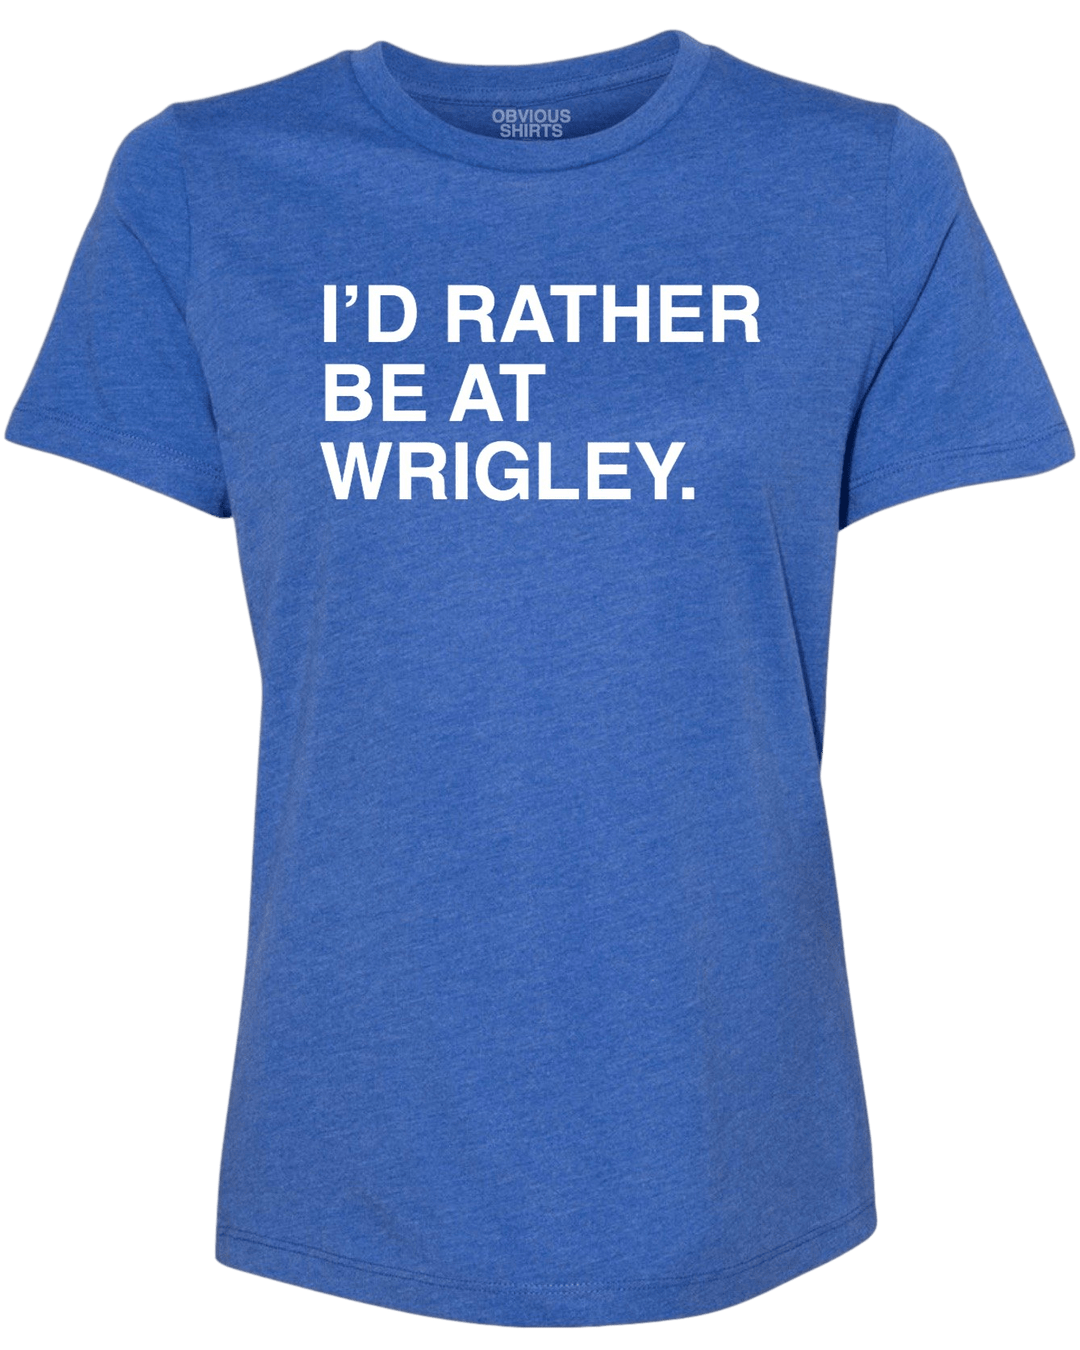 I'D RATHER BE AT WRIGLEY. (WOMEN'S CREW) - OBVIOUS SHIRTS.